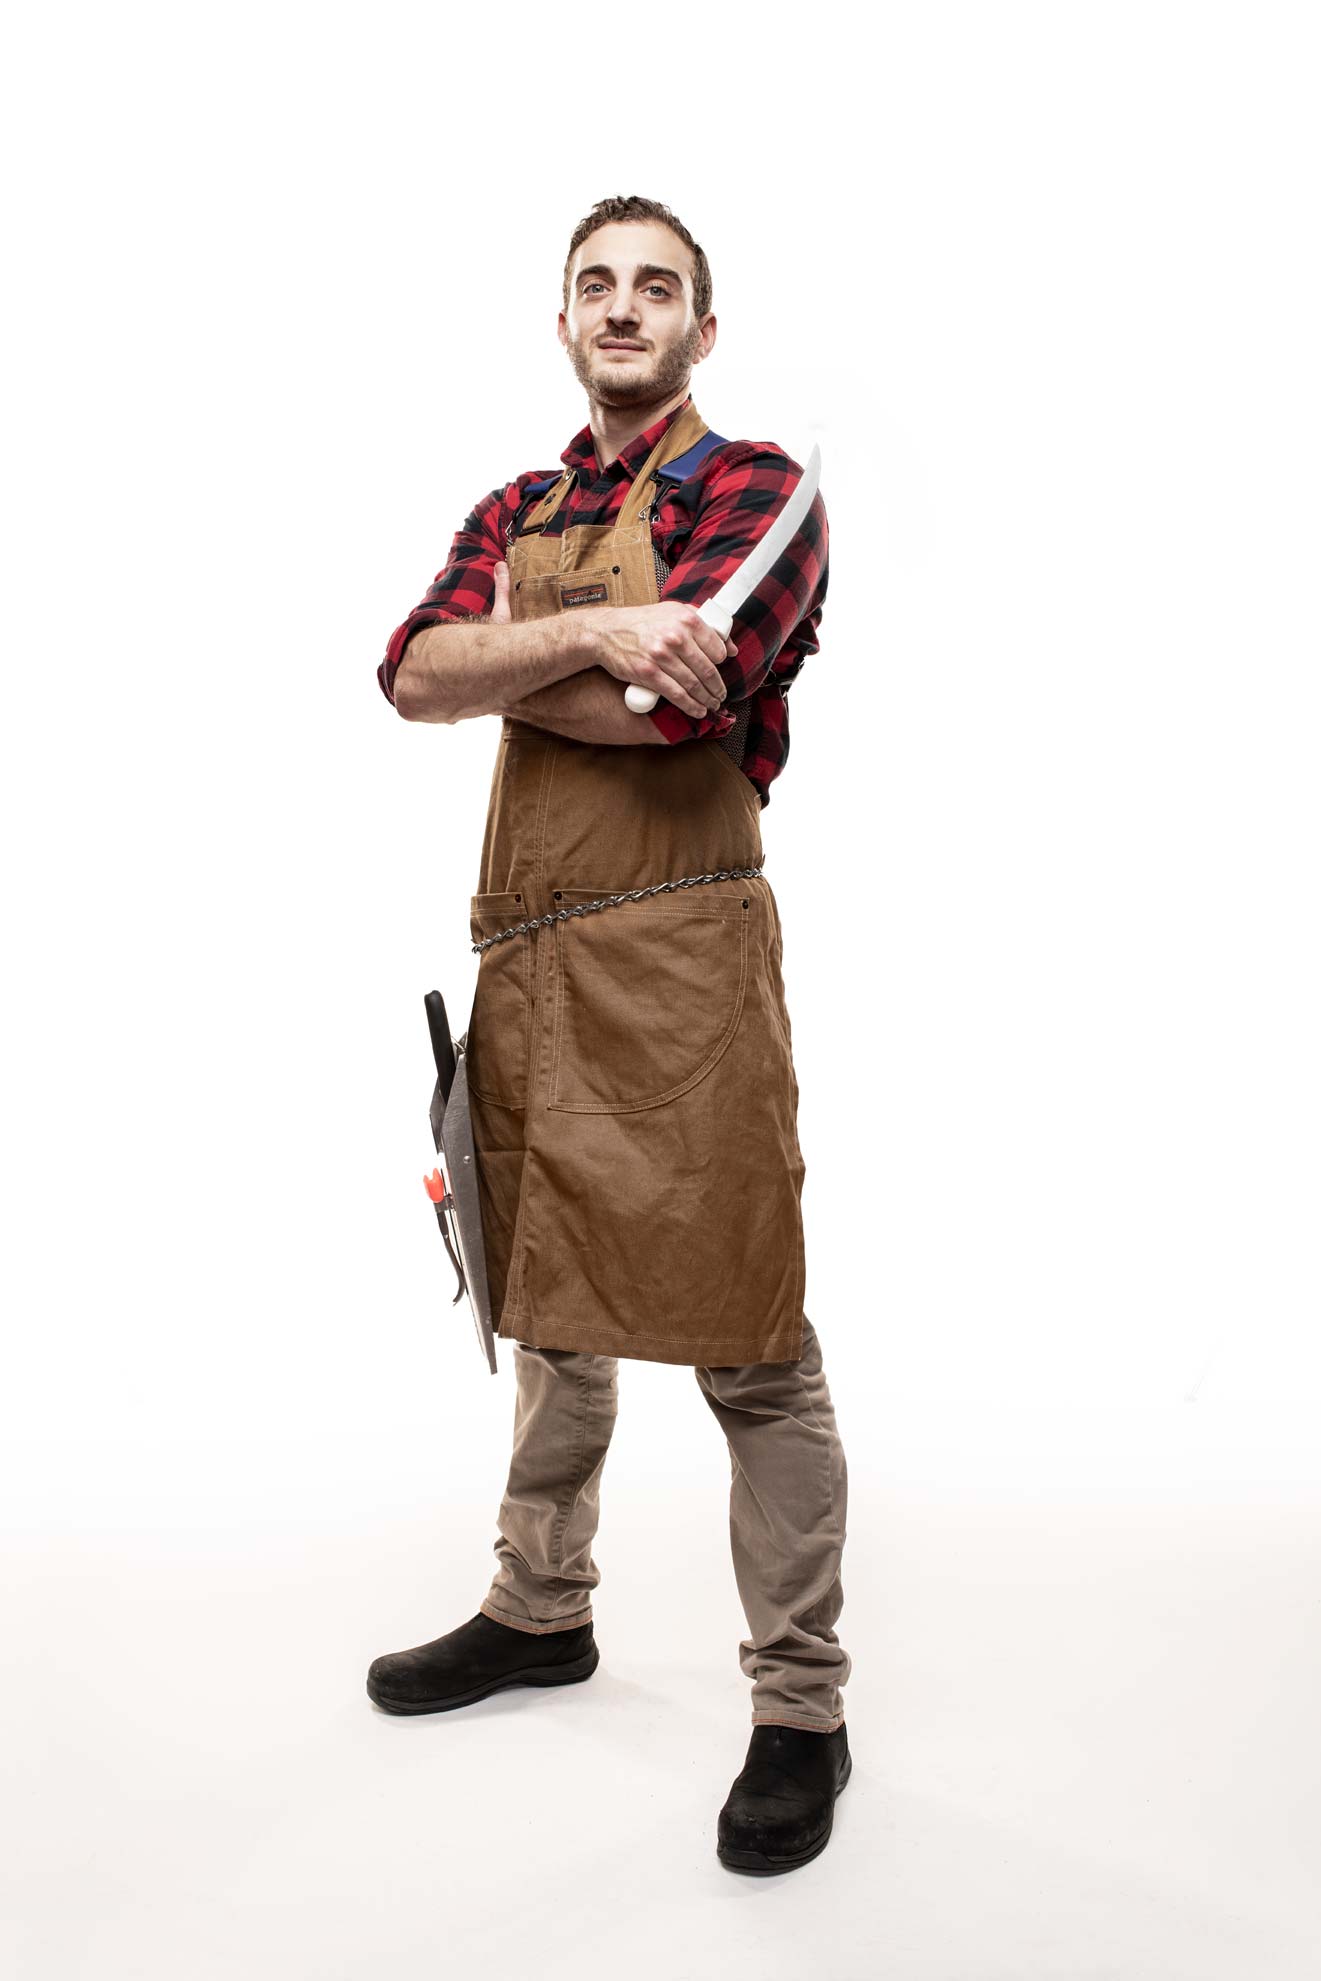 Butcher Mark Mancuso standing with his arms folded and holding a knife on a white background